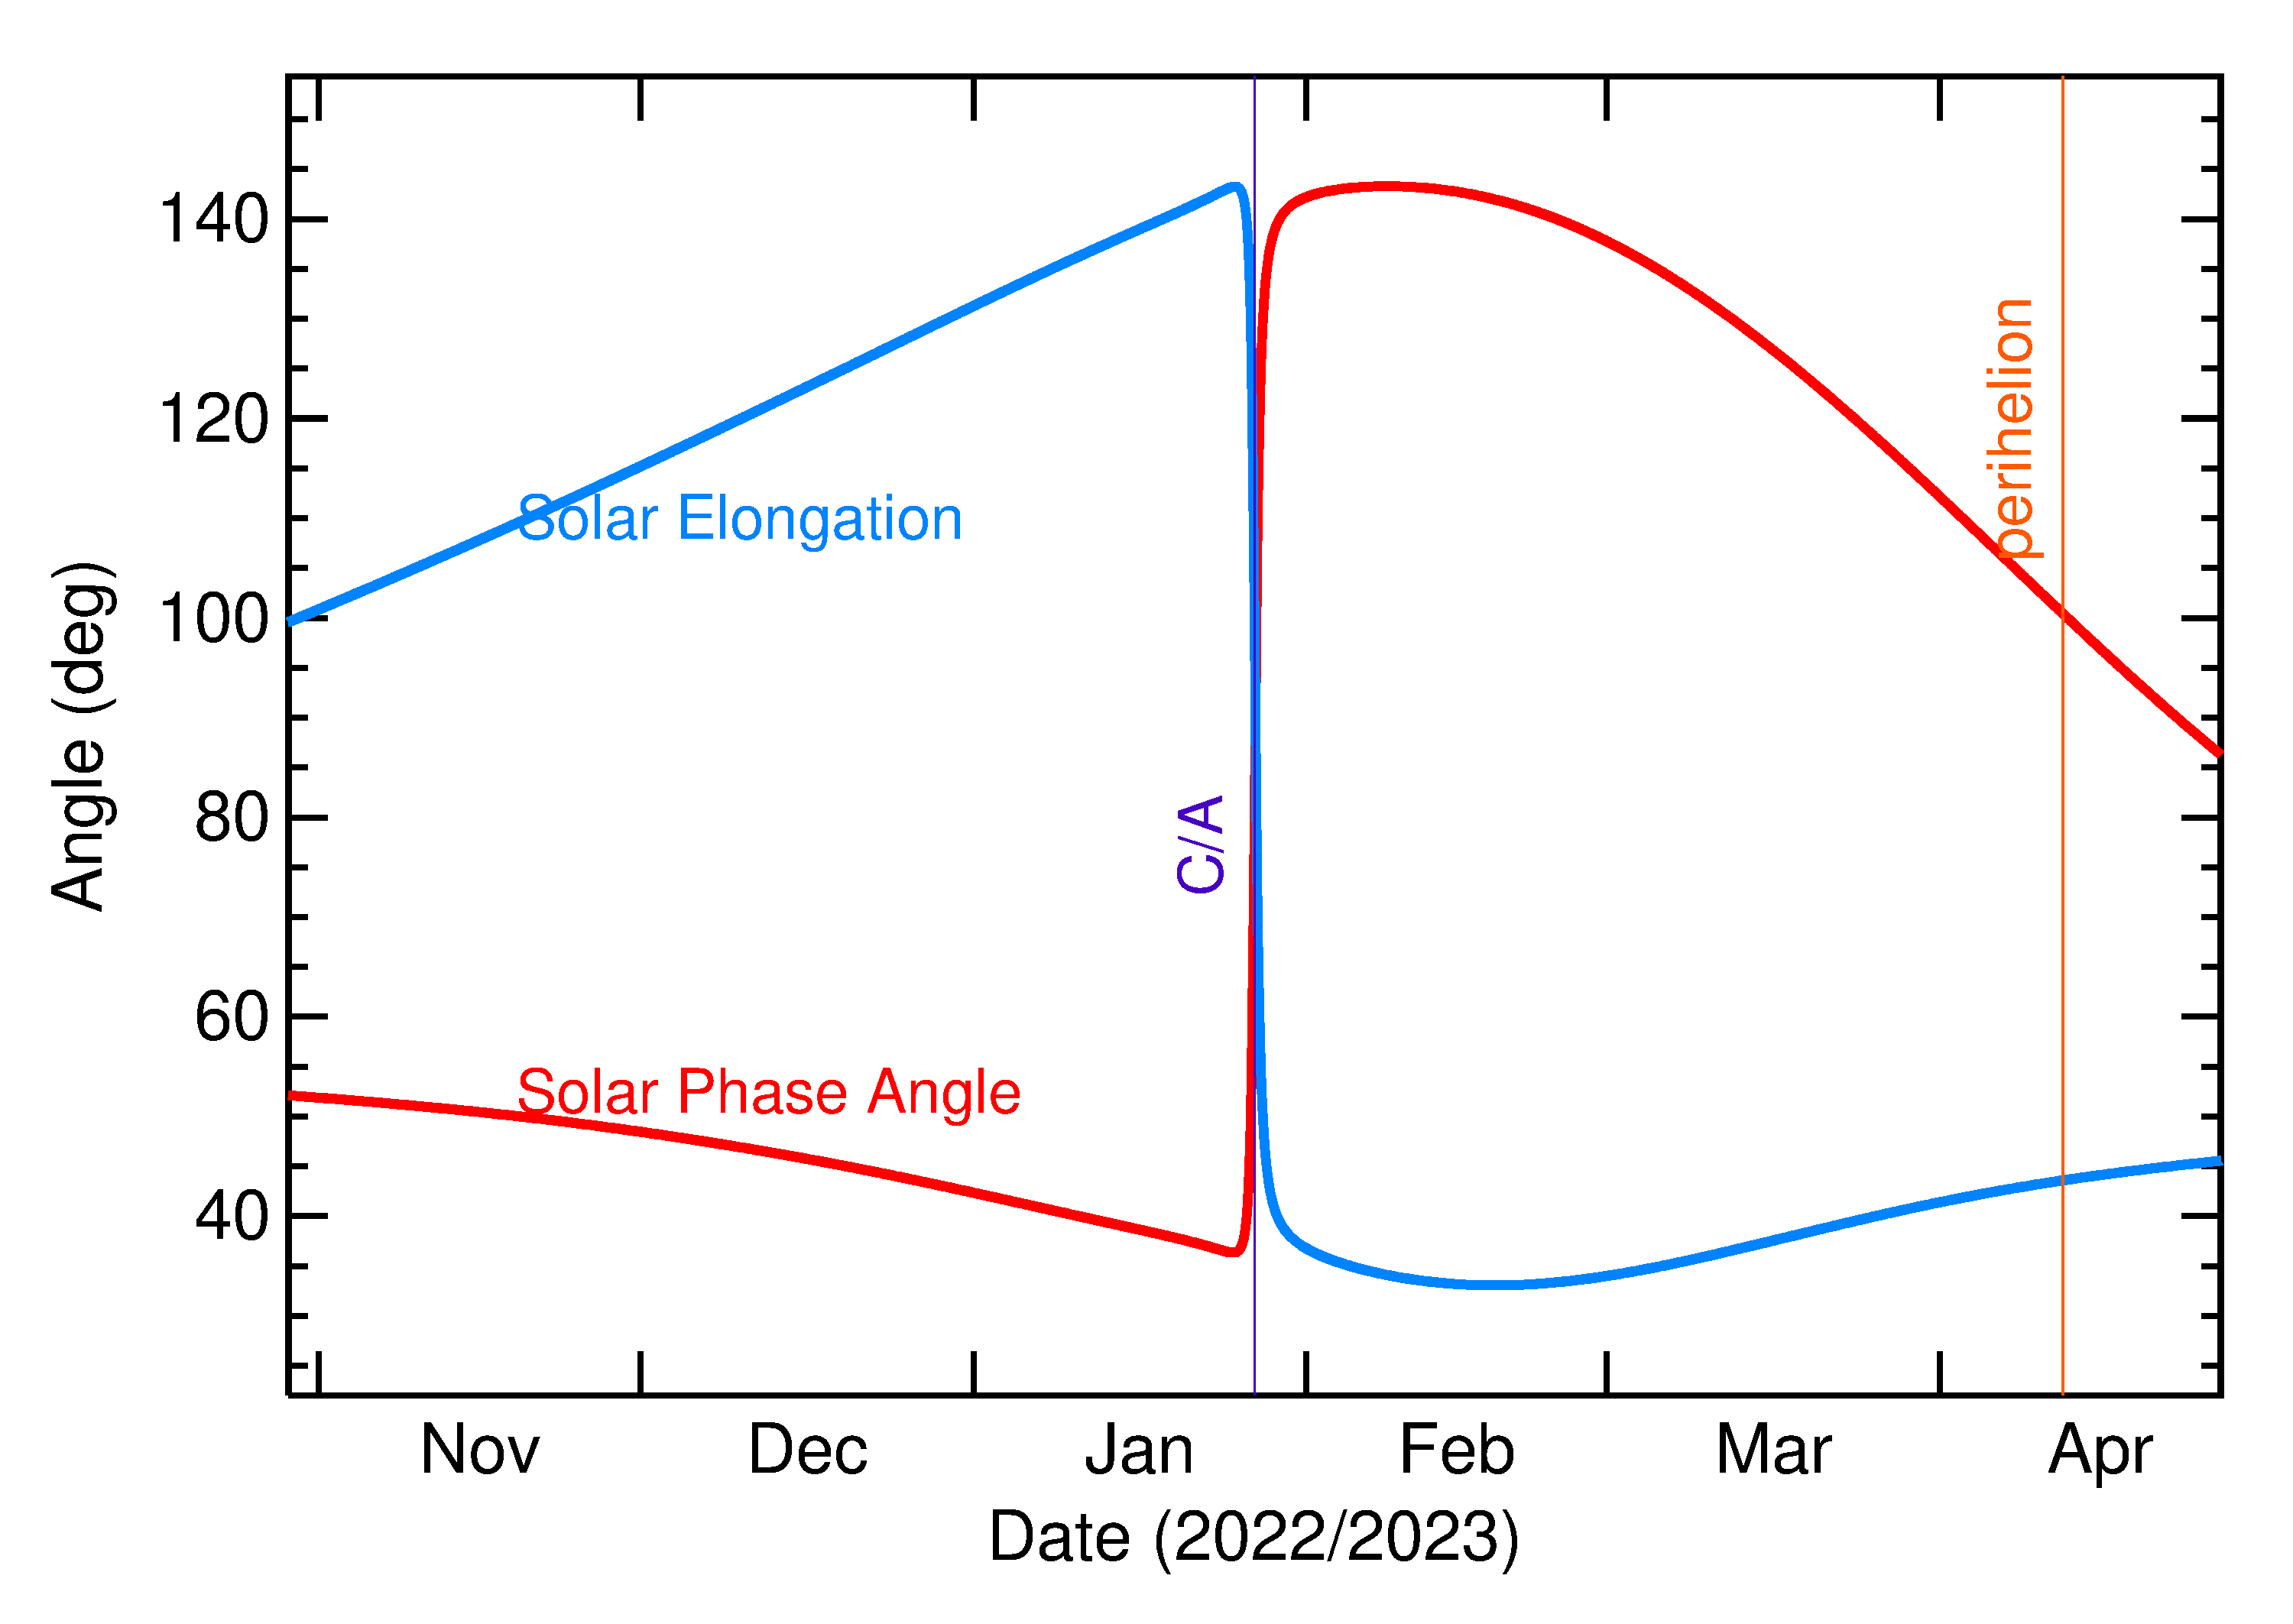 Solar Elongation and Solar Phase Angle of 2023 BL2 in the months around closest approach